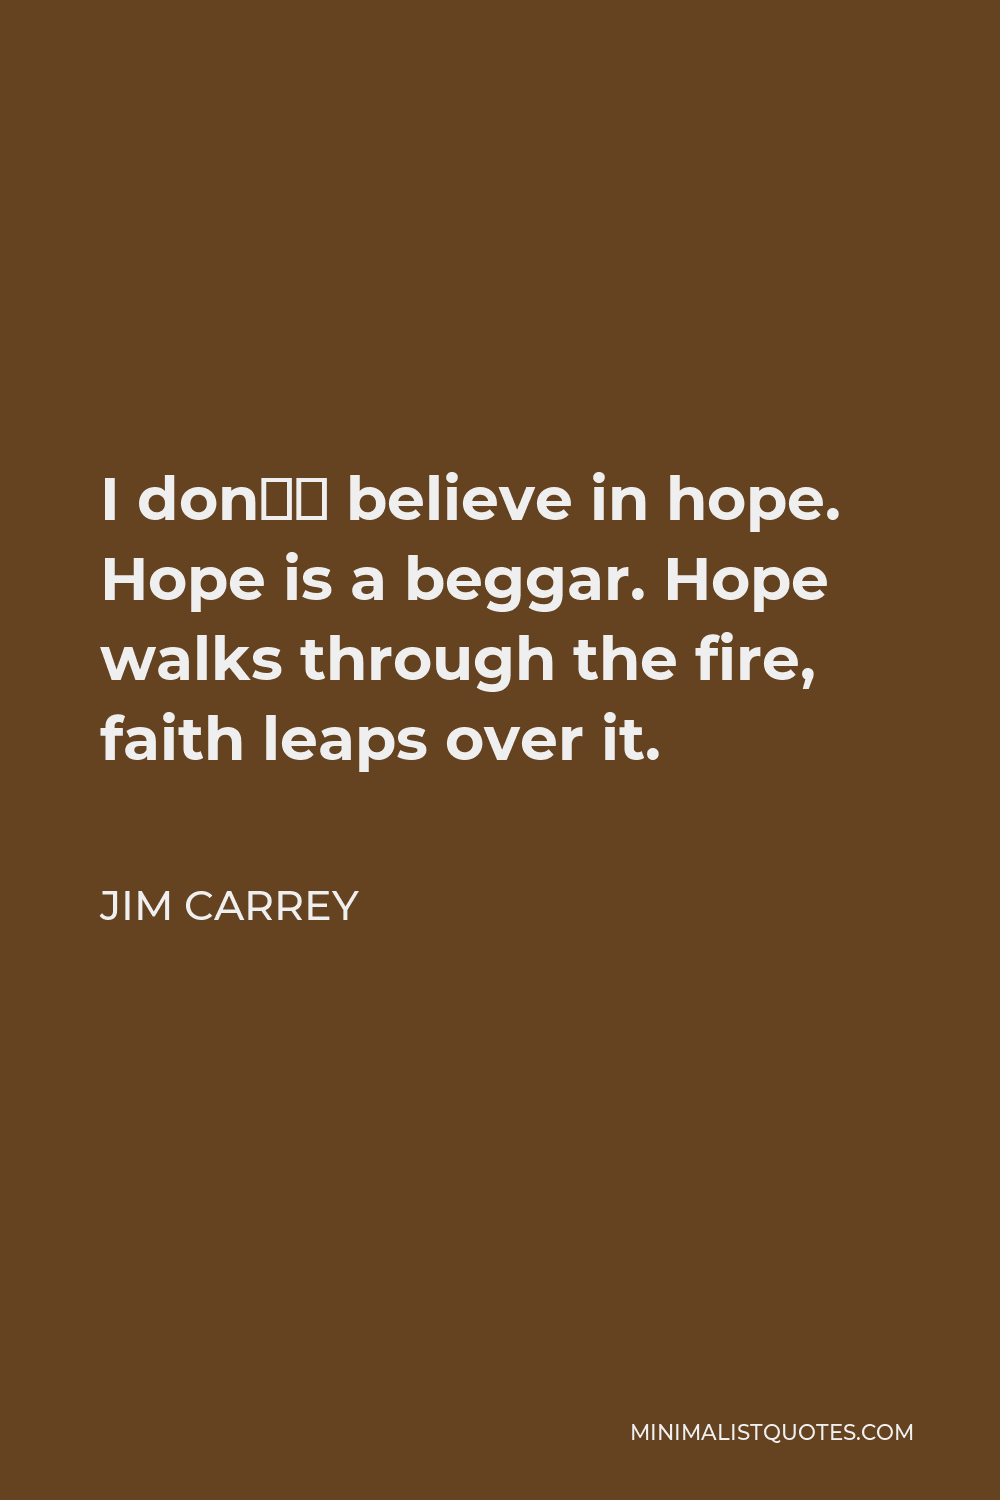 Jim Carrey Quote - I don’t believe in hope. Hope is a beggar. Hope walks through the fire, faith leaps over it.